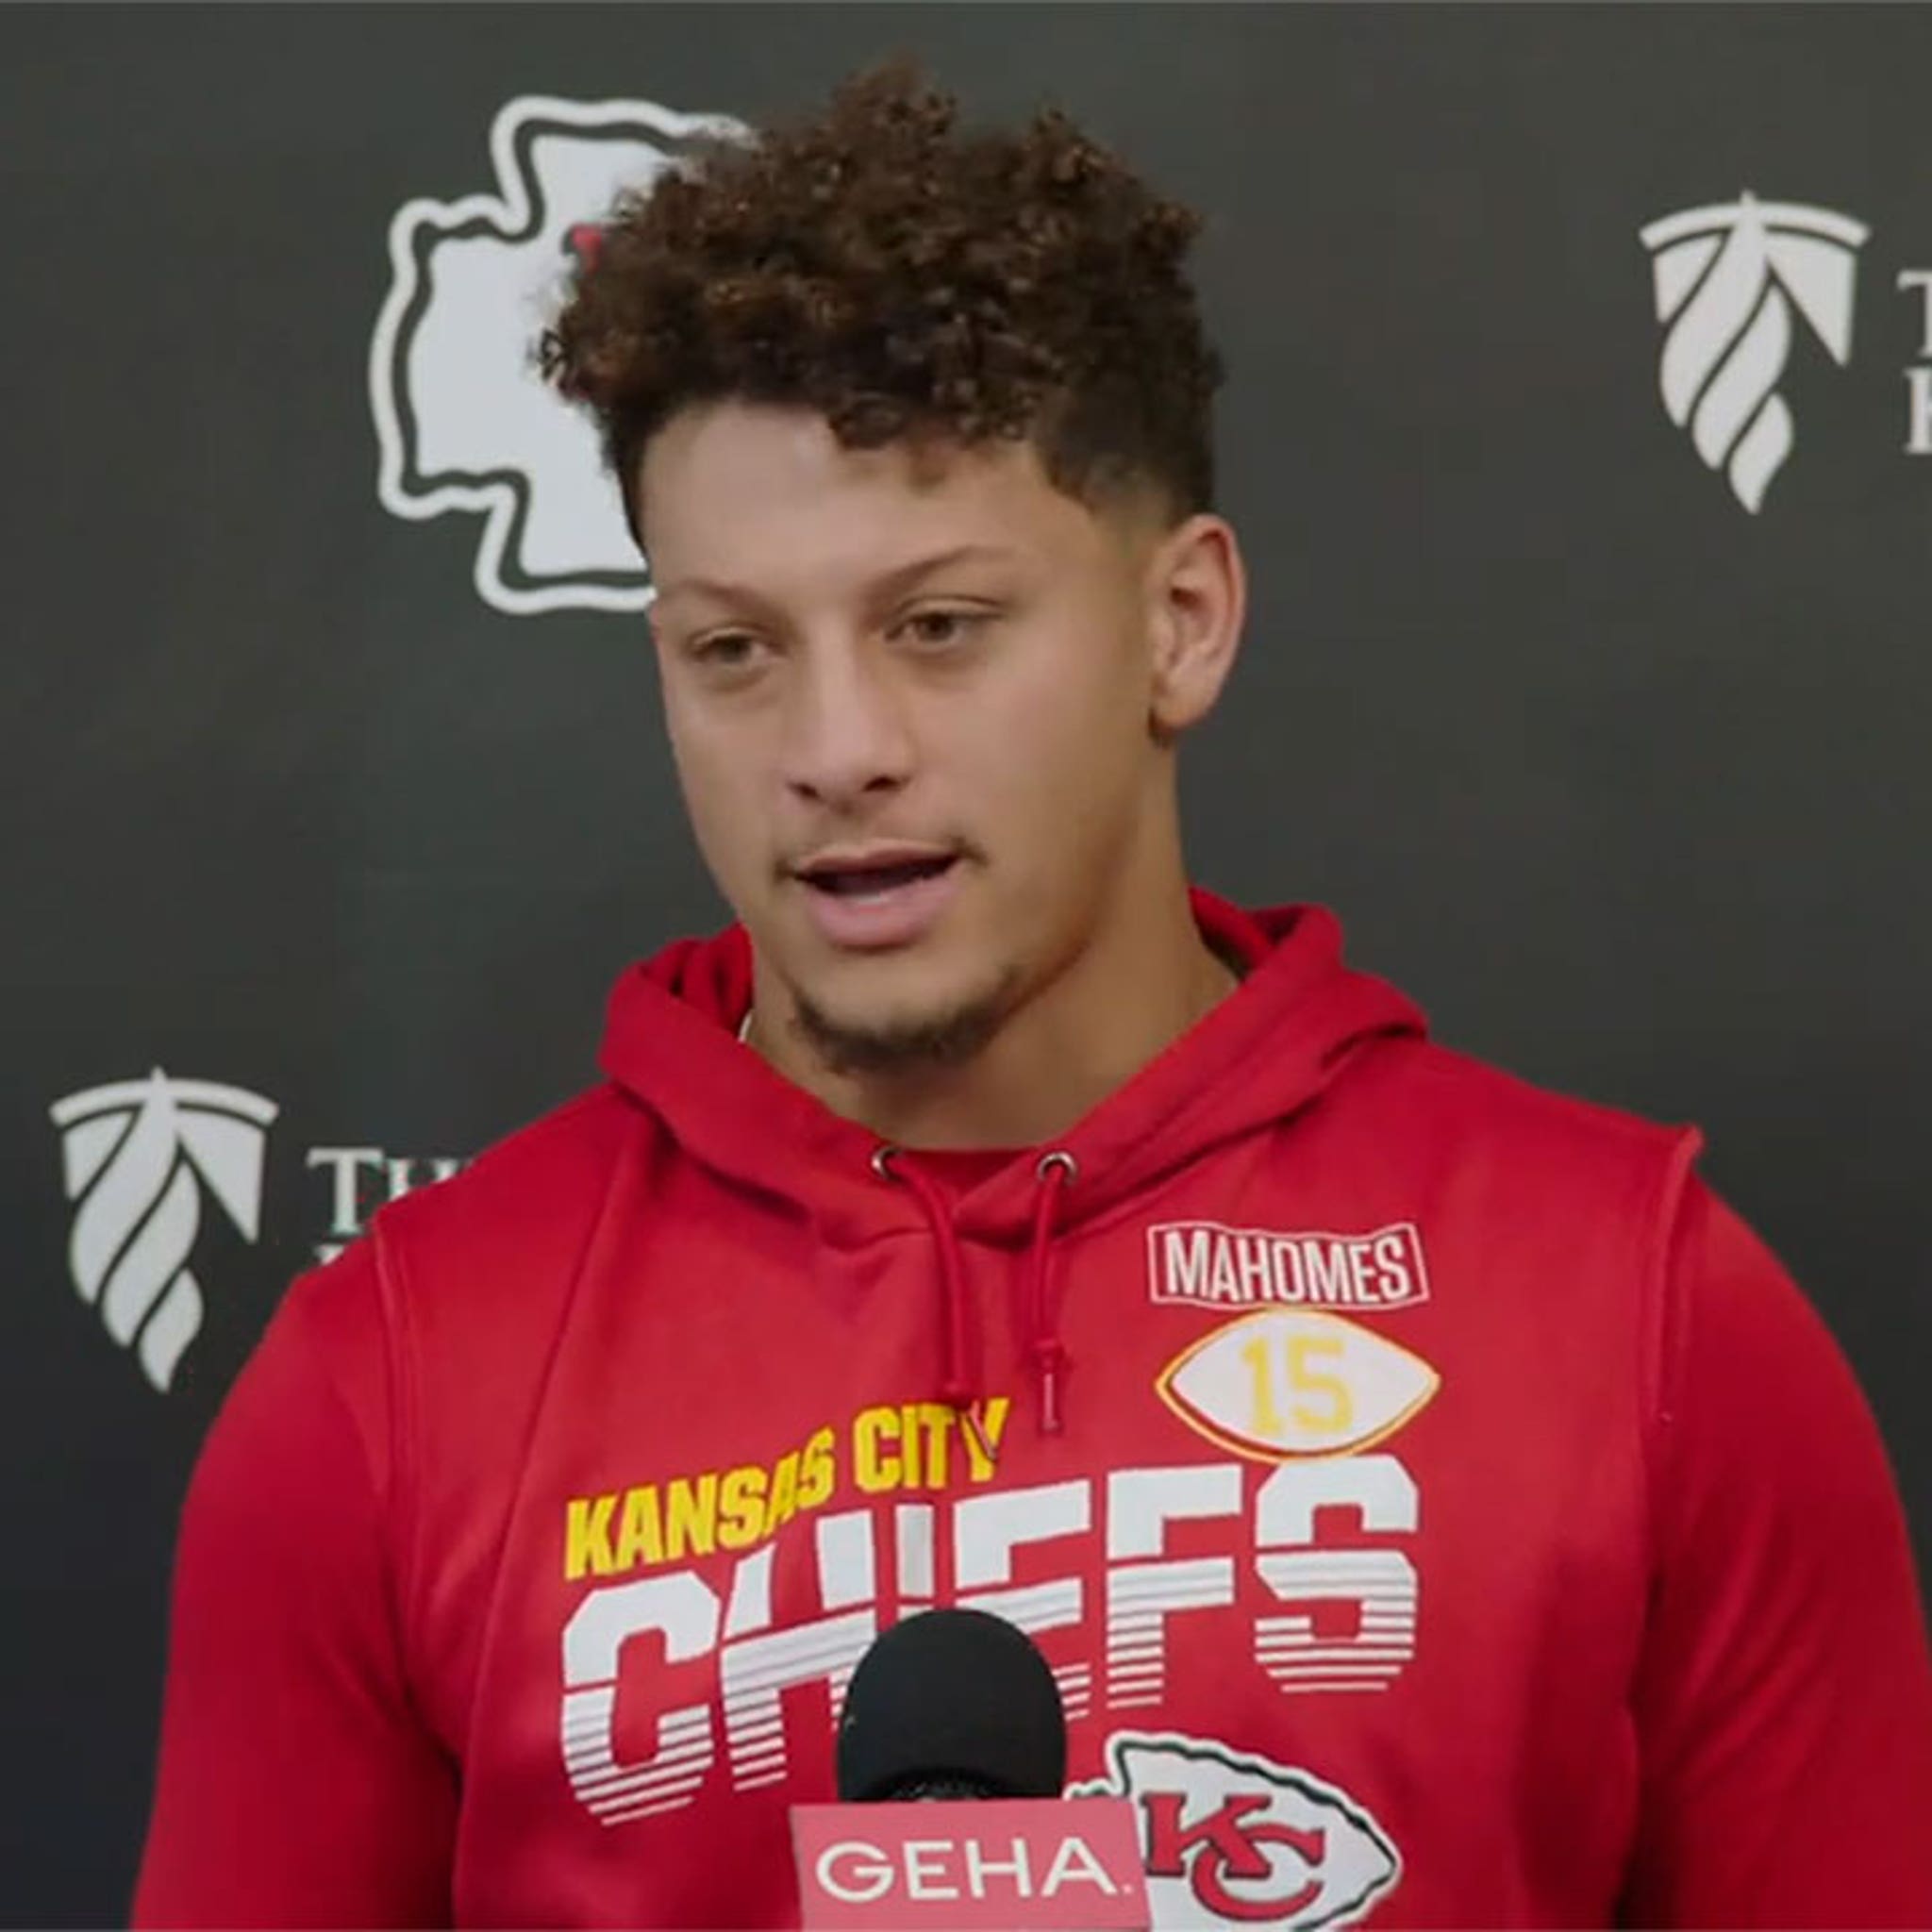 Twitter Furious Over How Patrick Mahomes' Brother Was Dancing